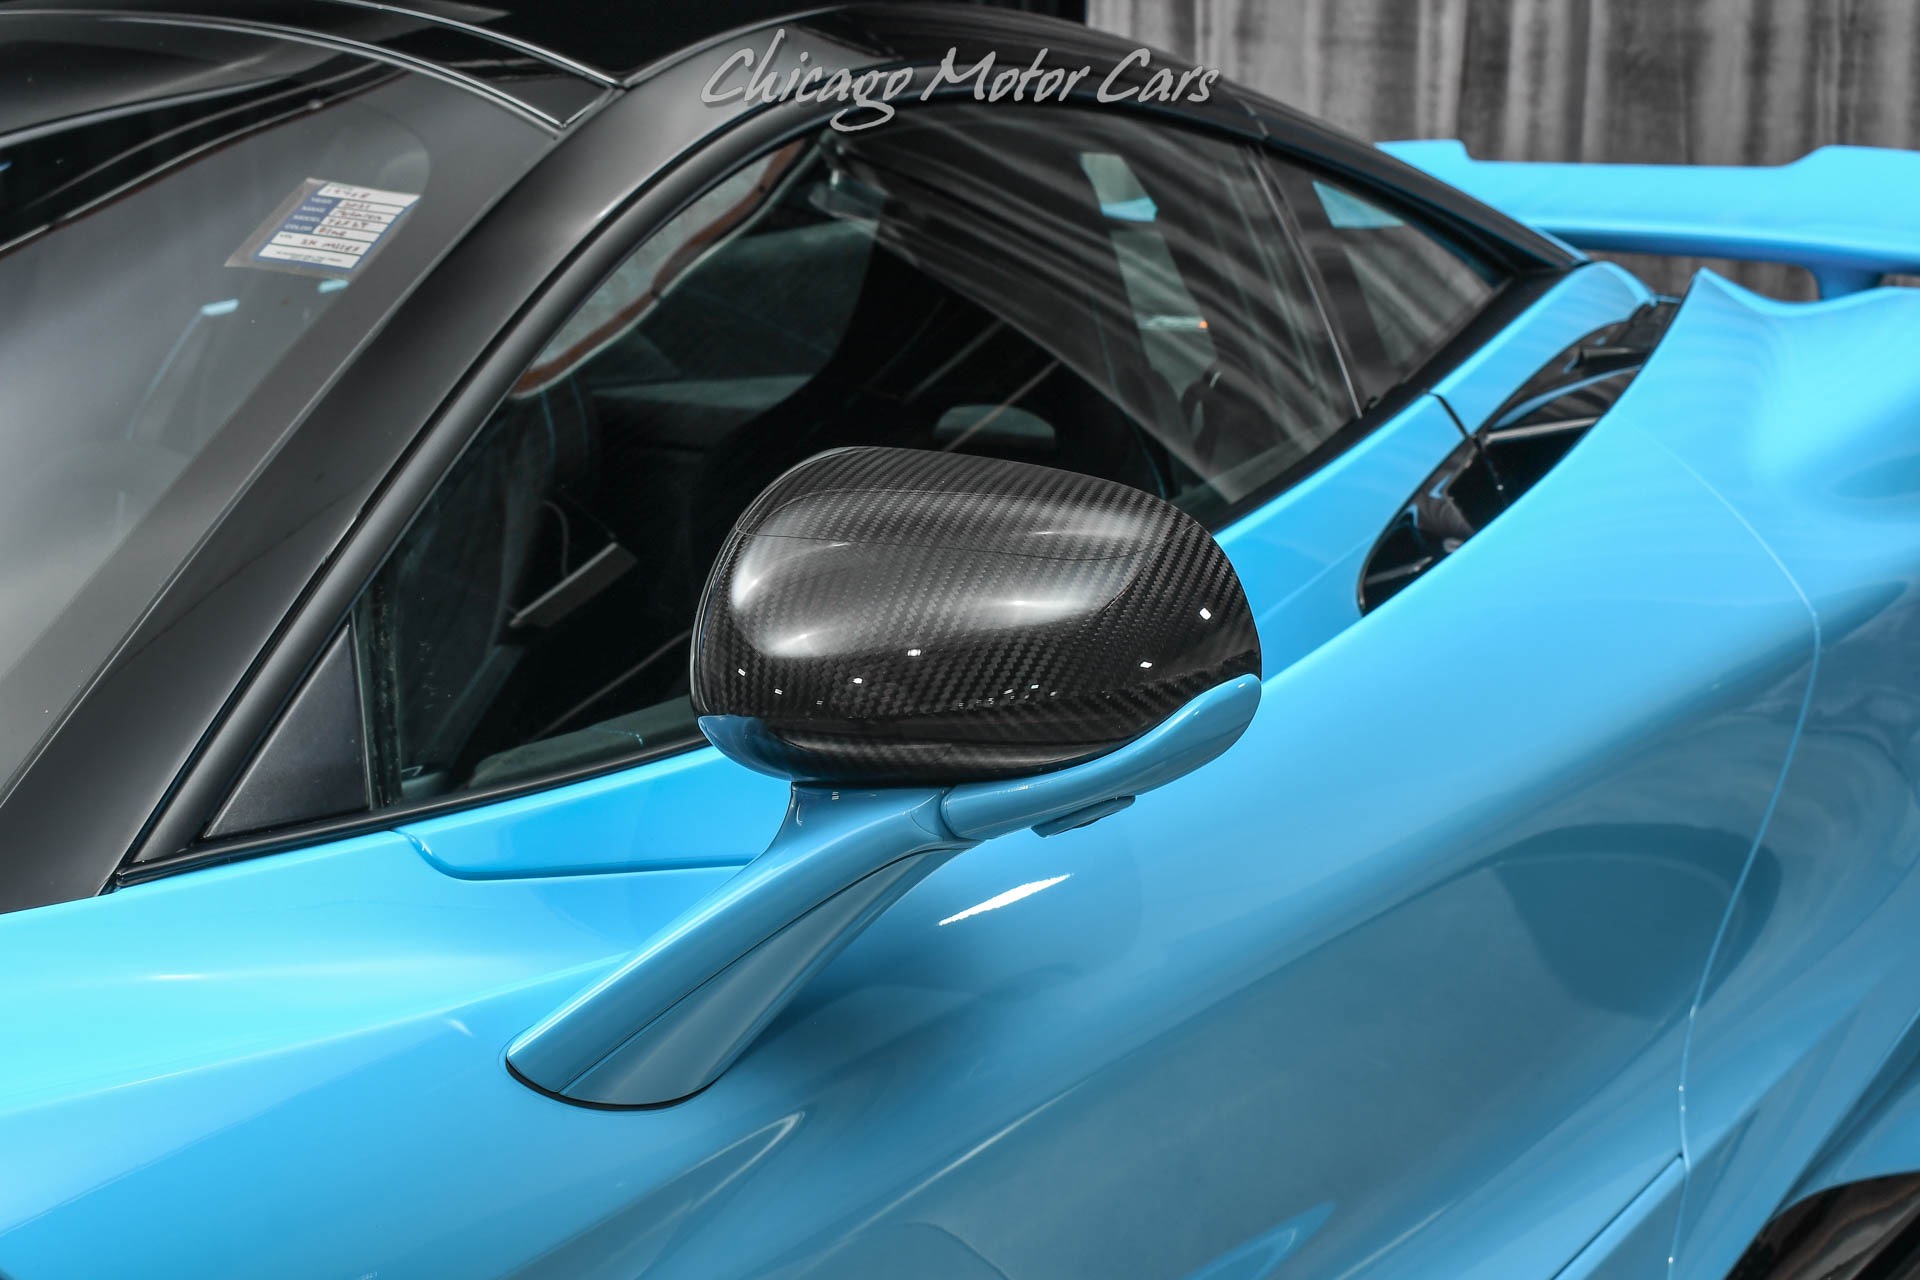 Used-2021-McLaren-765LT-Coupe-RARE-Curacao-Blue-Paint-MSO-Black-Pack-ONLY-2K-Miles